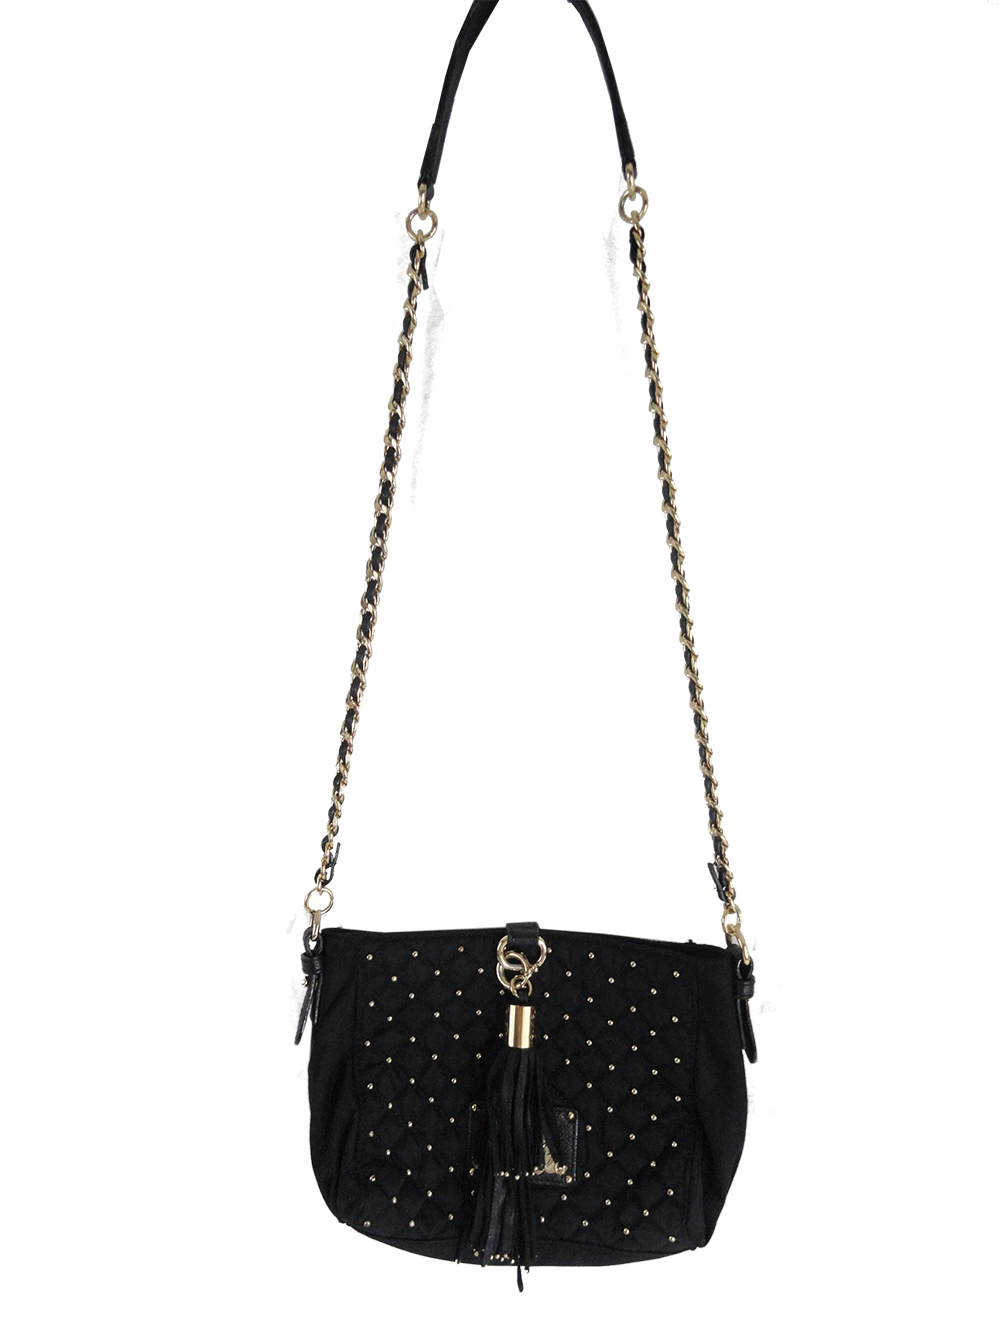 Stylish Juicy Couture Black Bag with Hearts Design